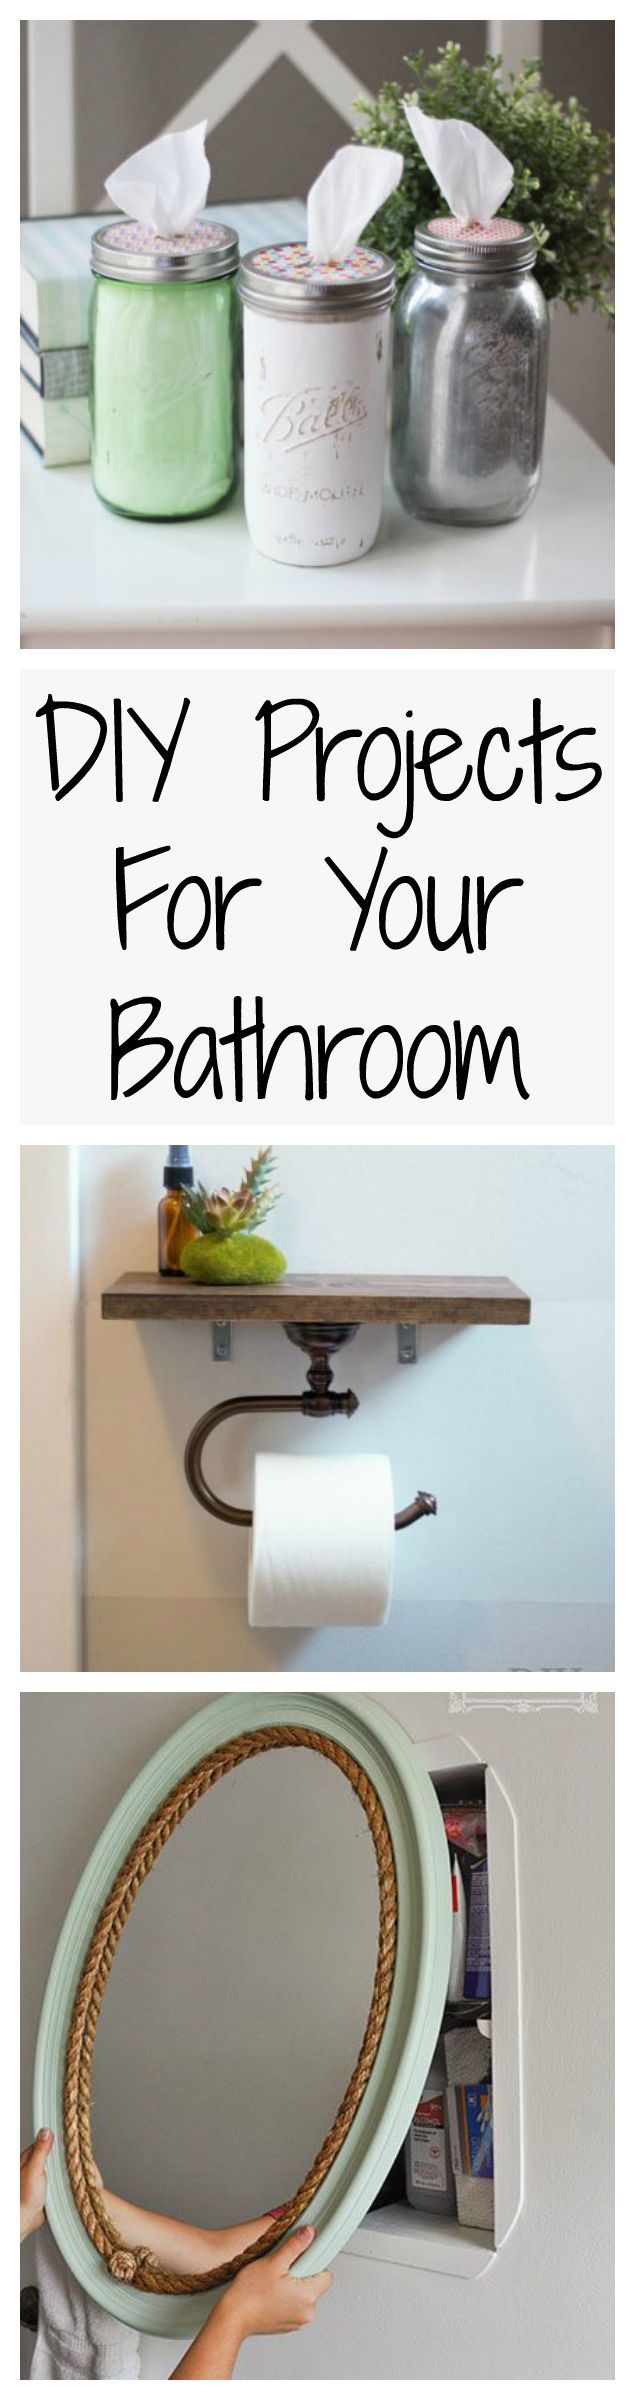 Your bathroom should be just as pretty as all the other rooms in your house, and these easy DIY projects could help make that